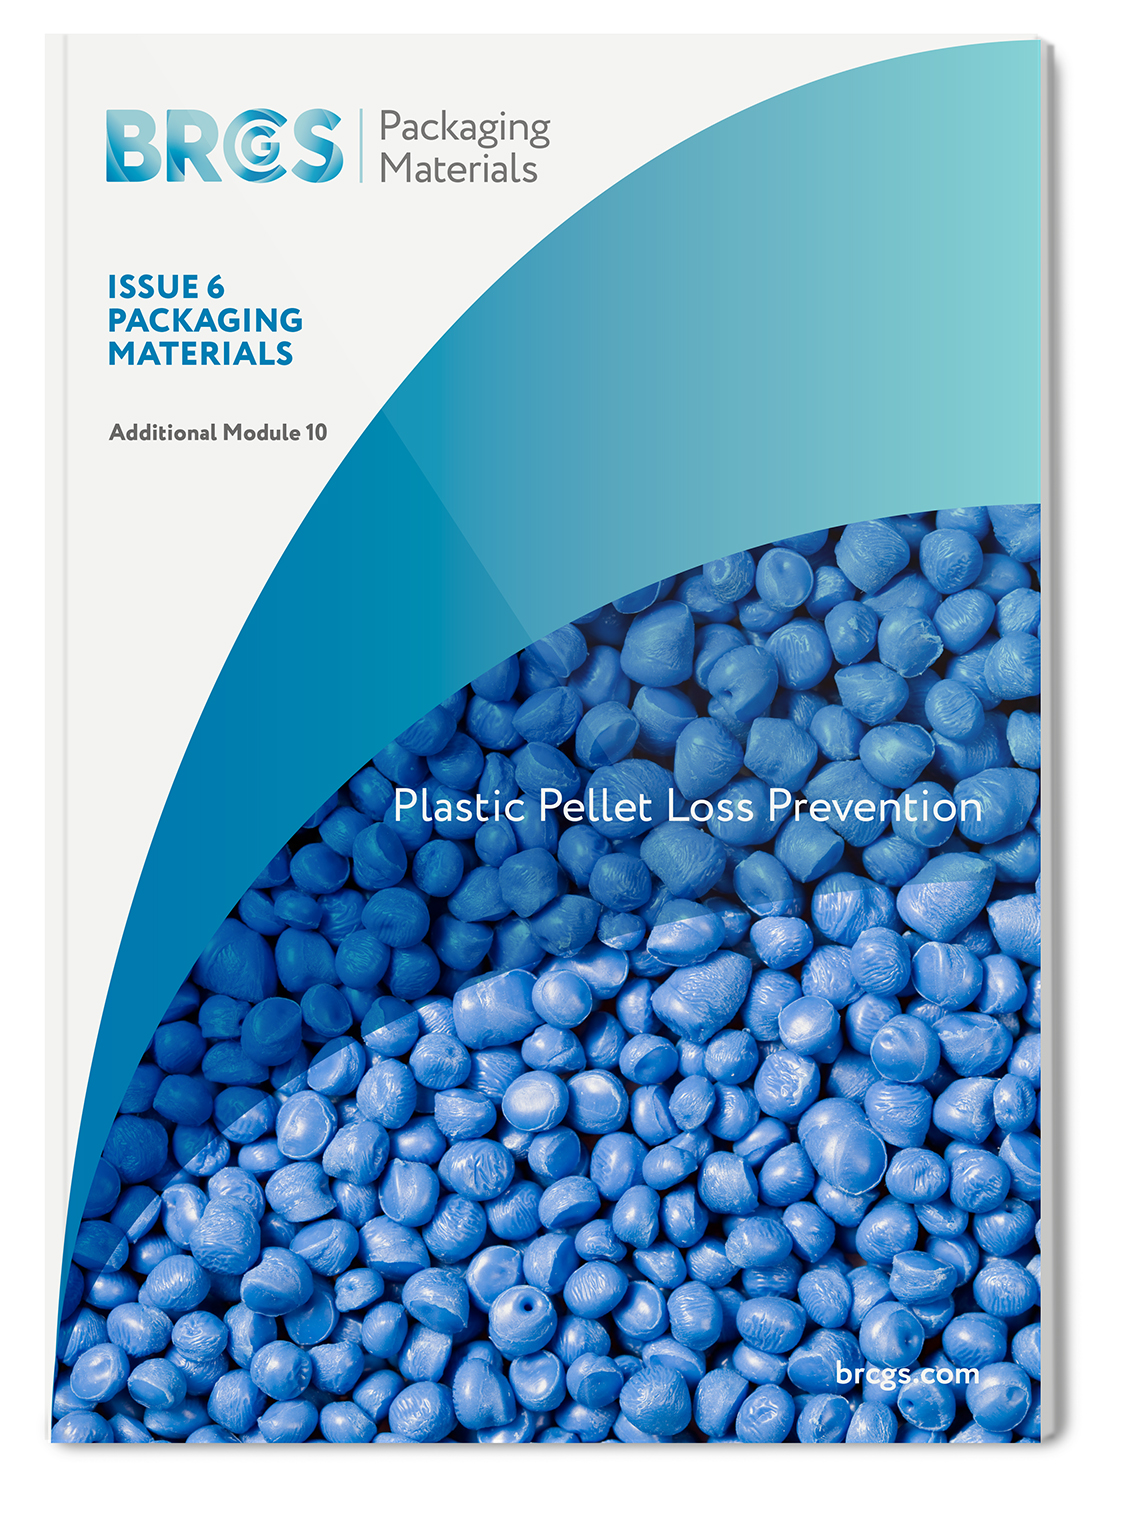 Global Standard Packaging Materials Issue 6 Additional Module 10 Plastic Pellet Loss Prevention